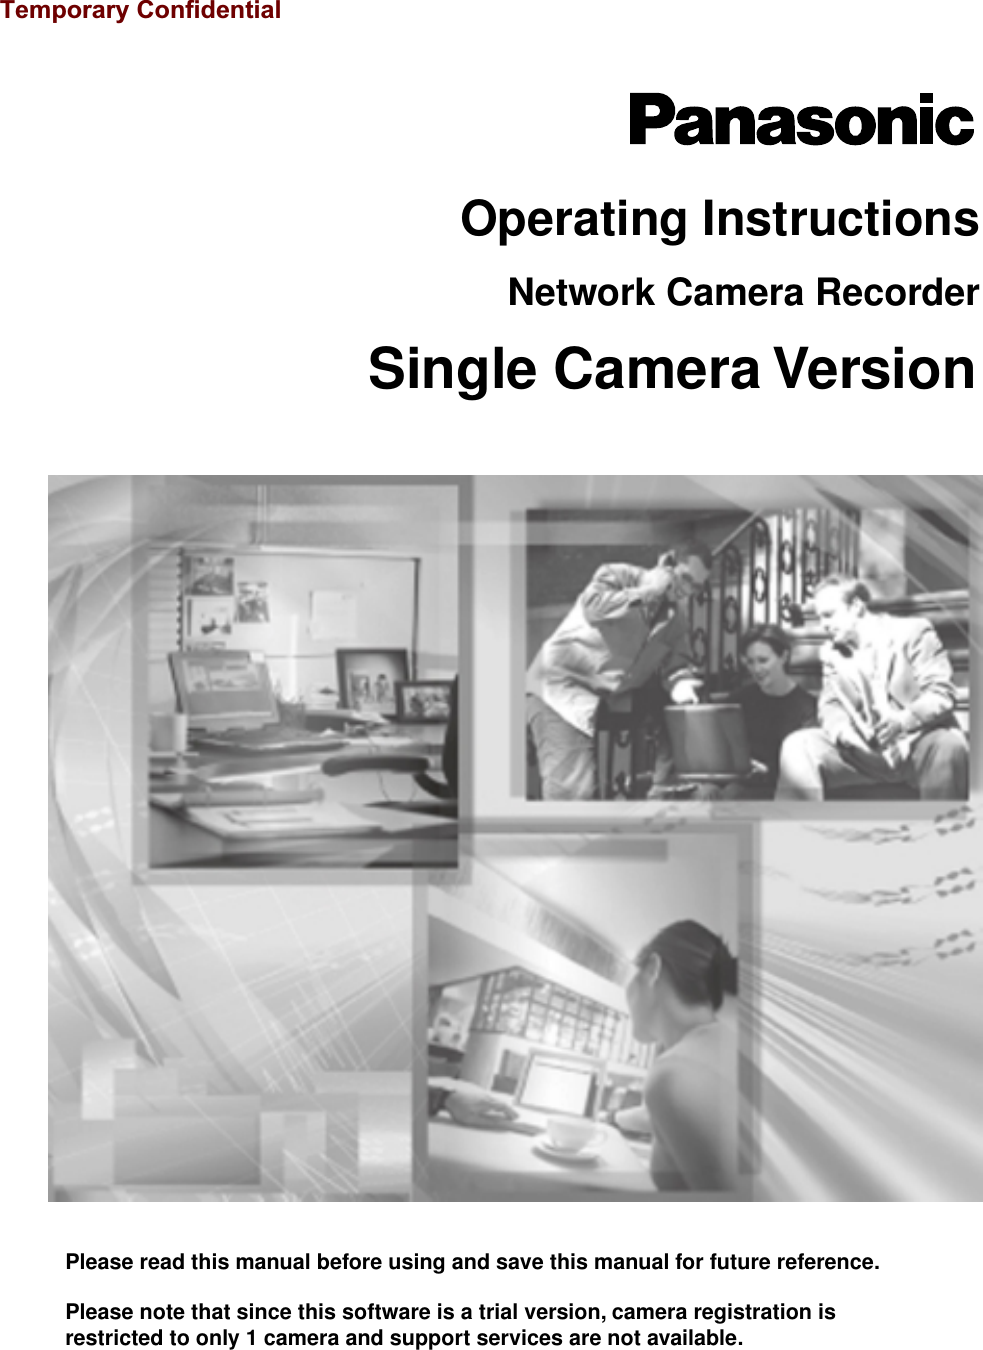 Operating InstructionsPlease read this manual before using and save this manual for future reference.Network Camera RecorderSingle Camera VersionPlease note that since this software is a trial version, camera registration is restricted to only 1 camera and support services are not available.Temporary Confidential